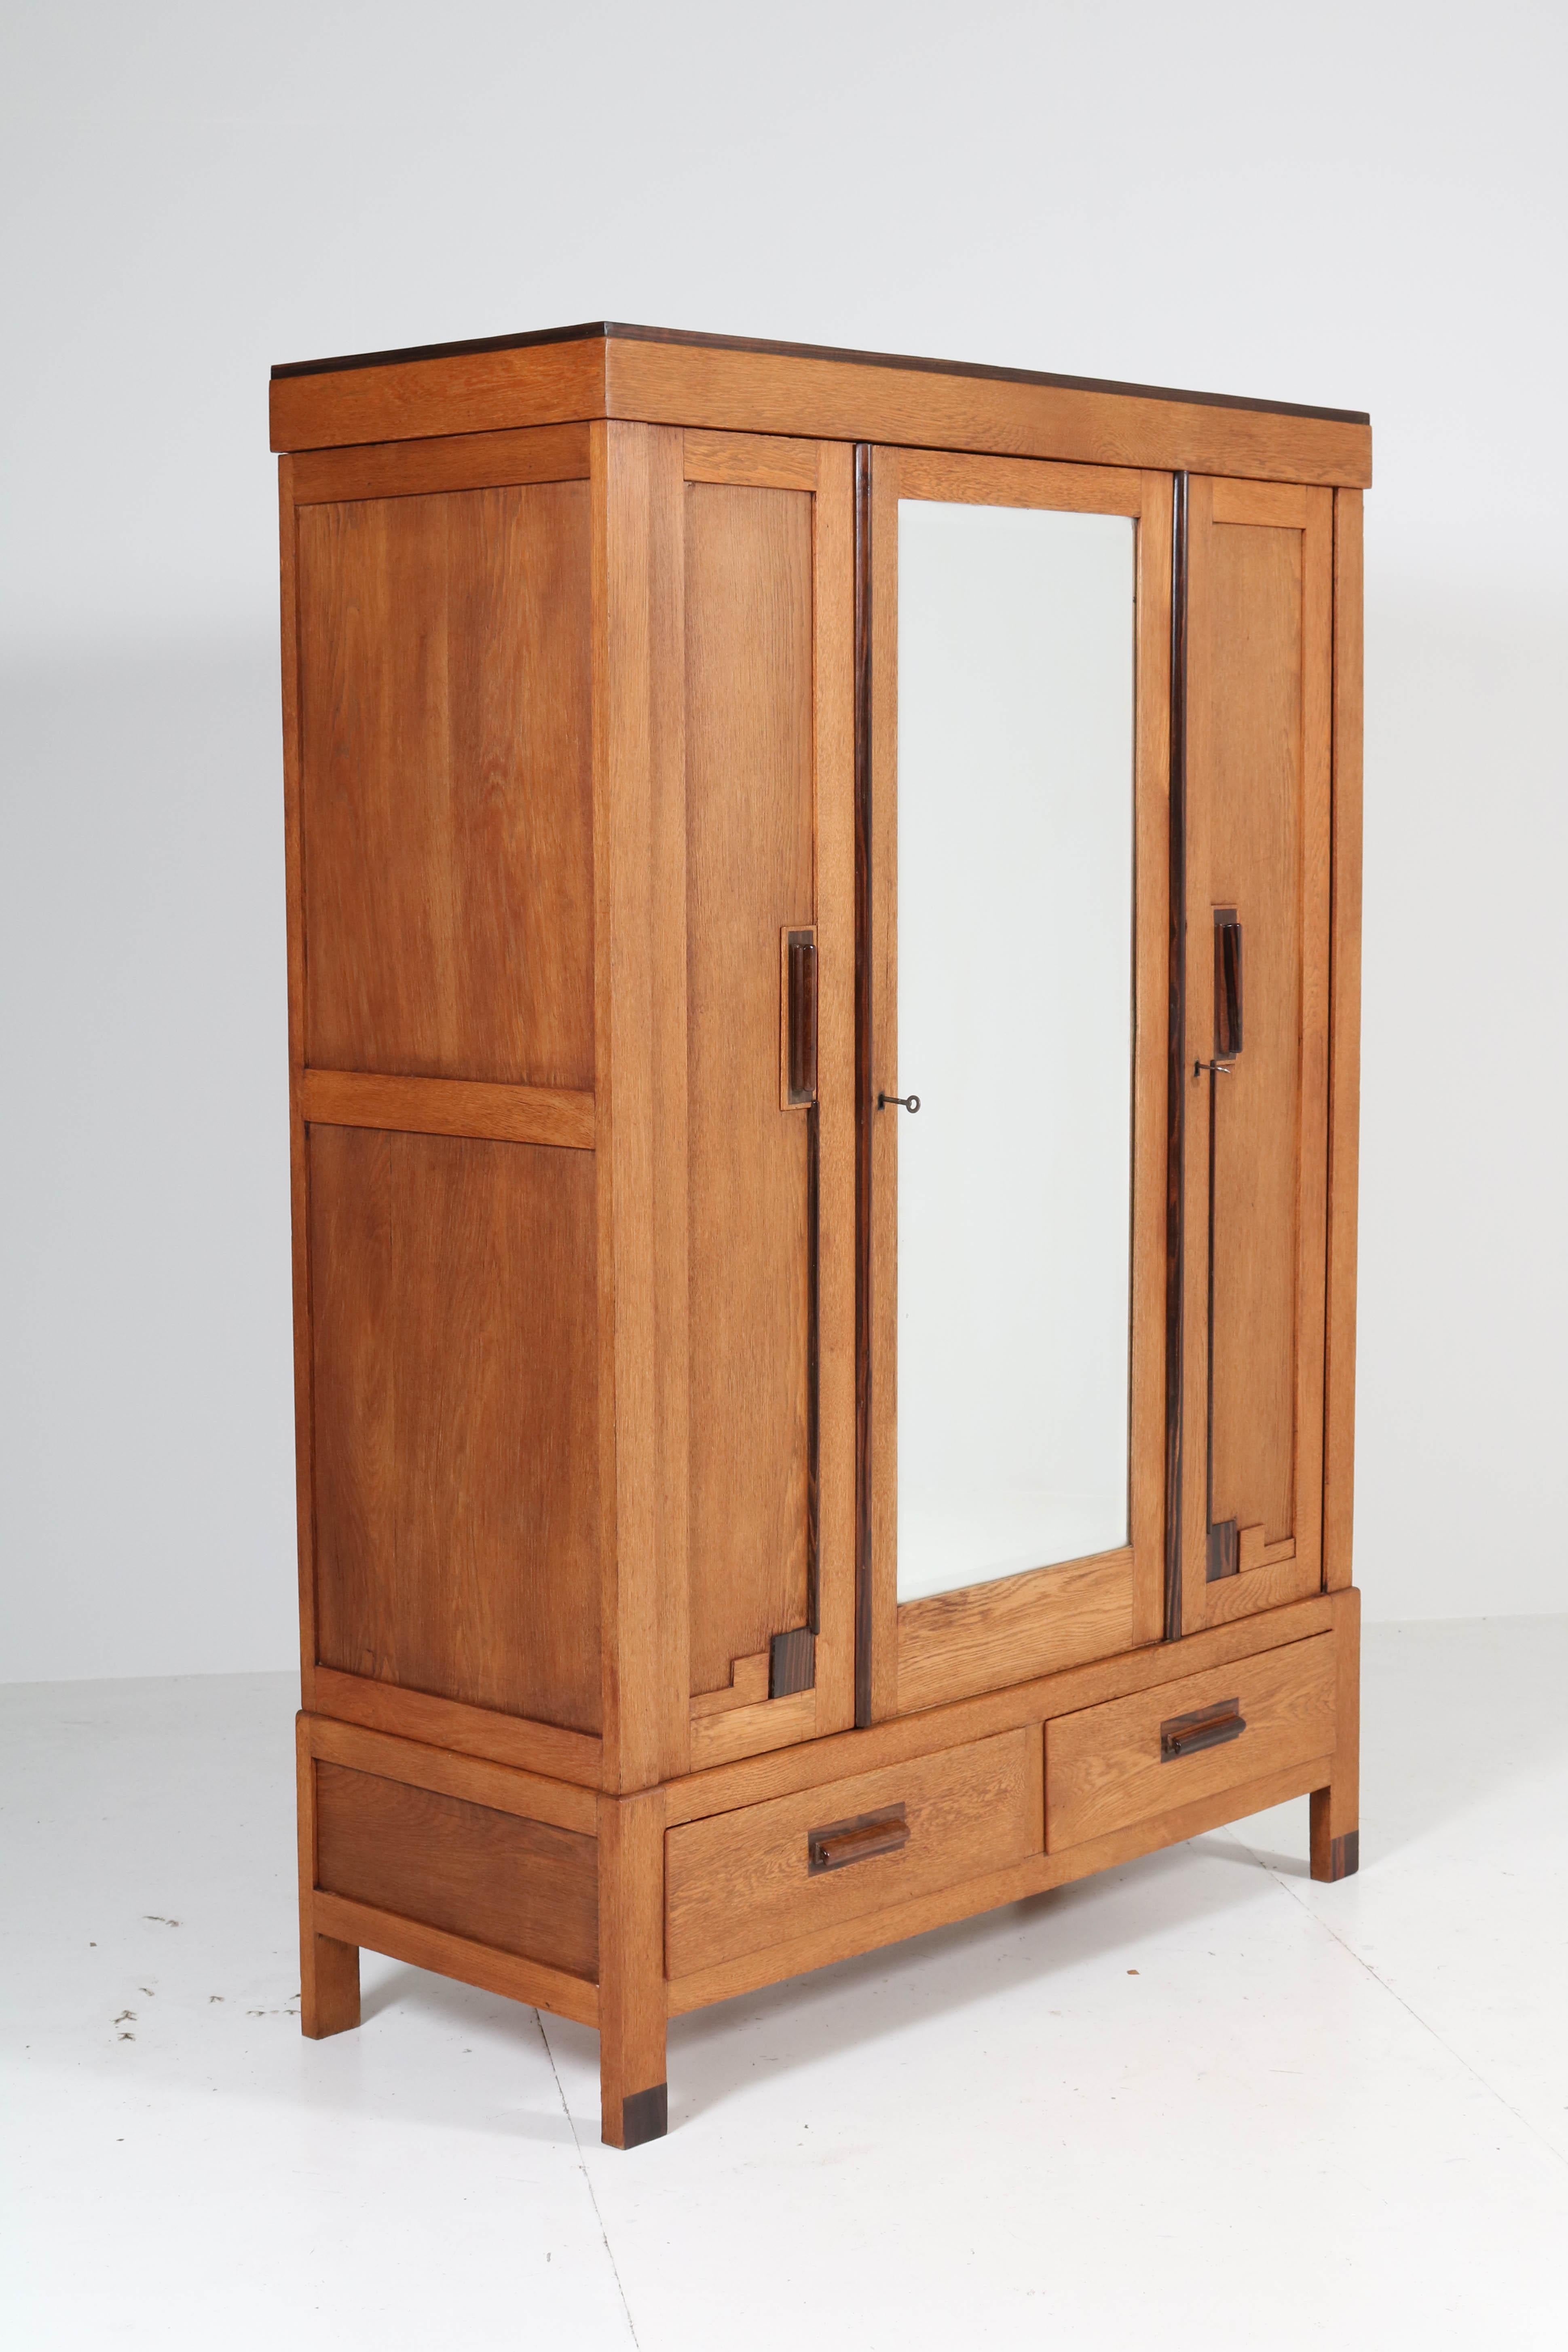 Wonderful Art Deco Haagse School armoire or wardrobe.
Striking Dutch design from the twenties.
Oak with solid Macassar ebony handles.
The brass bar for hanging clothes is behind the left door and the door
with the original beveled